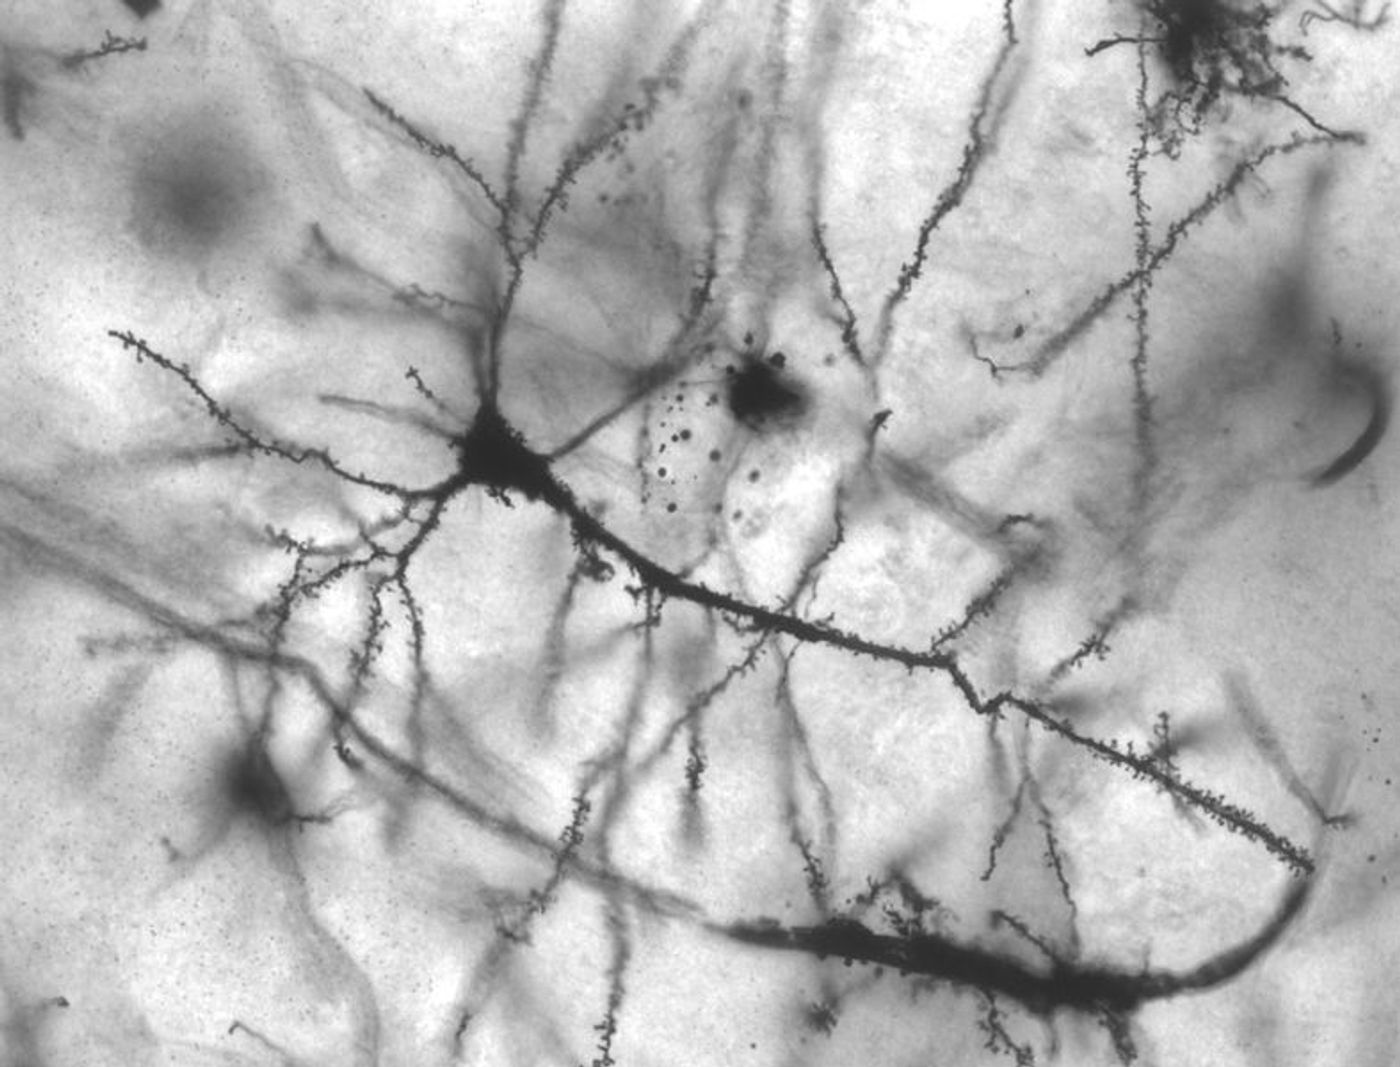 Golgi stained pyramidal neuron in the hippocampus of an epileptic patient. Credit: MethoxyRoxy